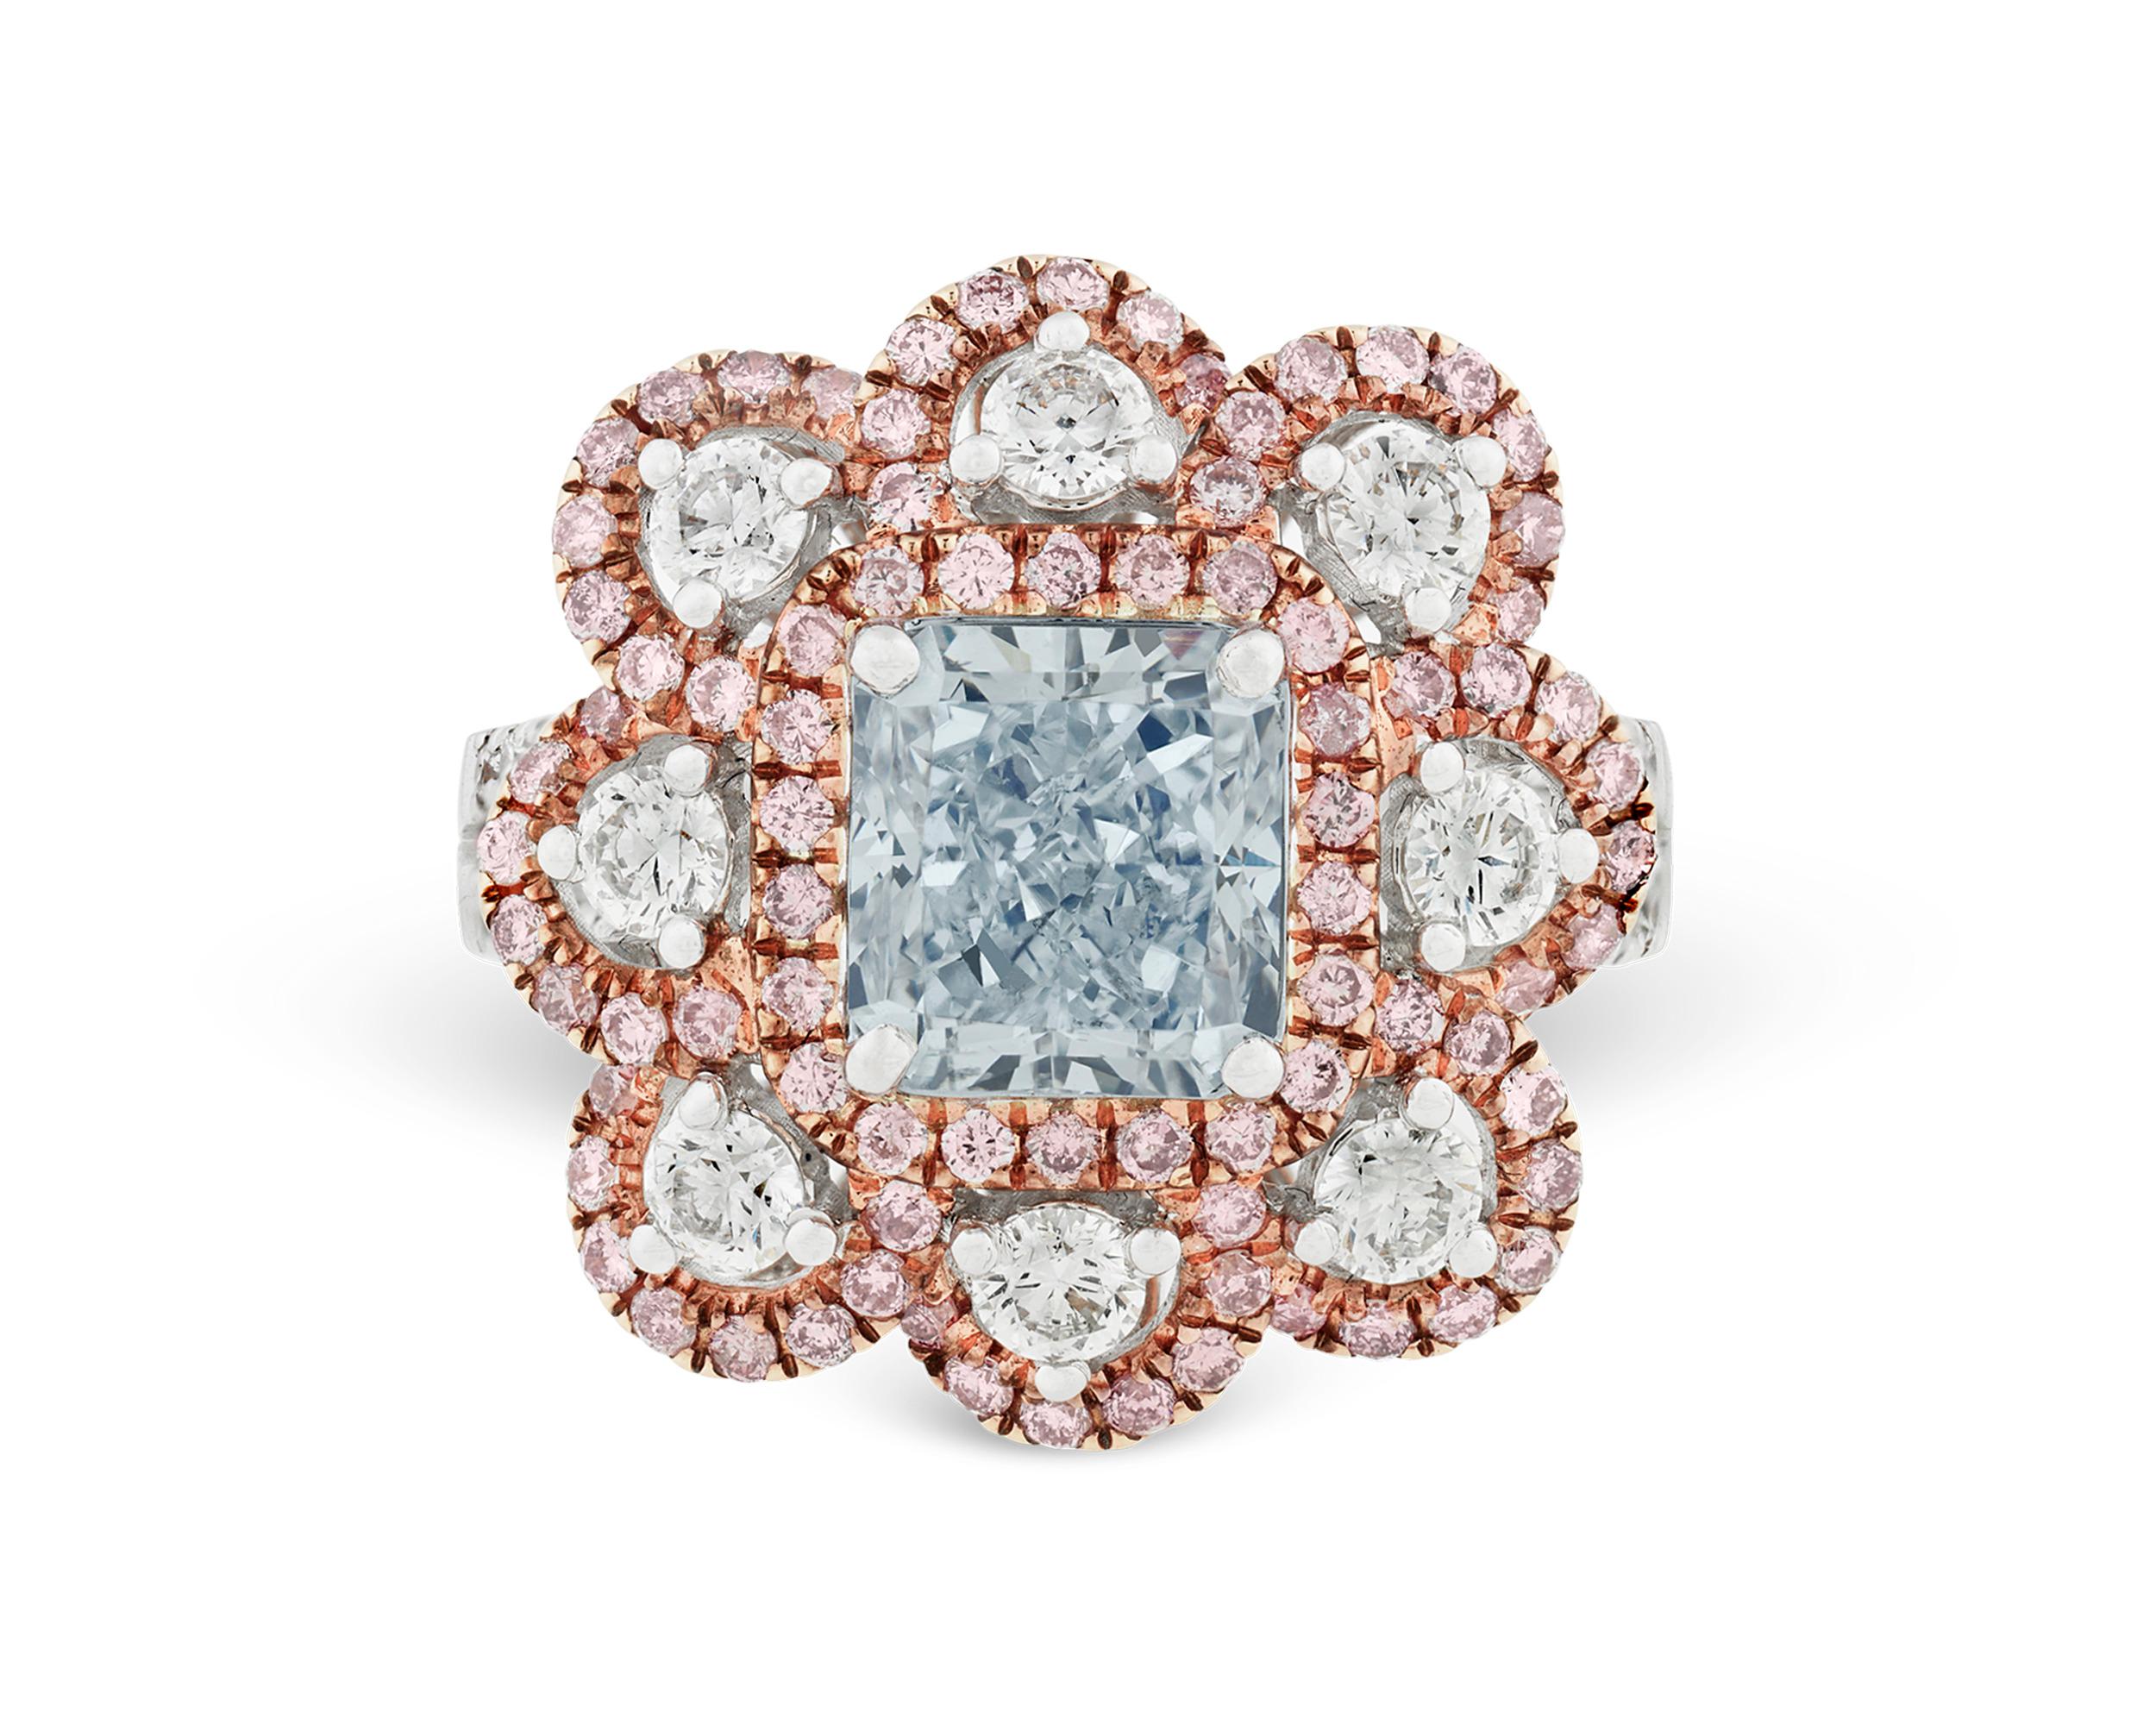 A rare 2.36-carat fancy very light blue diamond captivates the eye in this enchanting ring. Diamonds with a blue hue are among the most coveted of all colored diamonds, prized for both their rarity and beauty. The delicate hue of this blue diamond